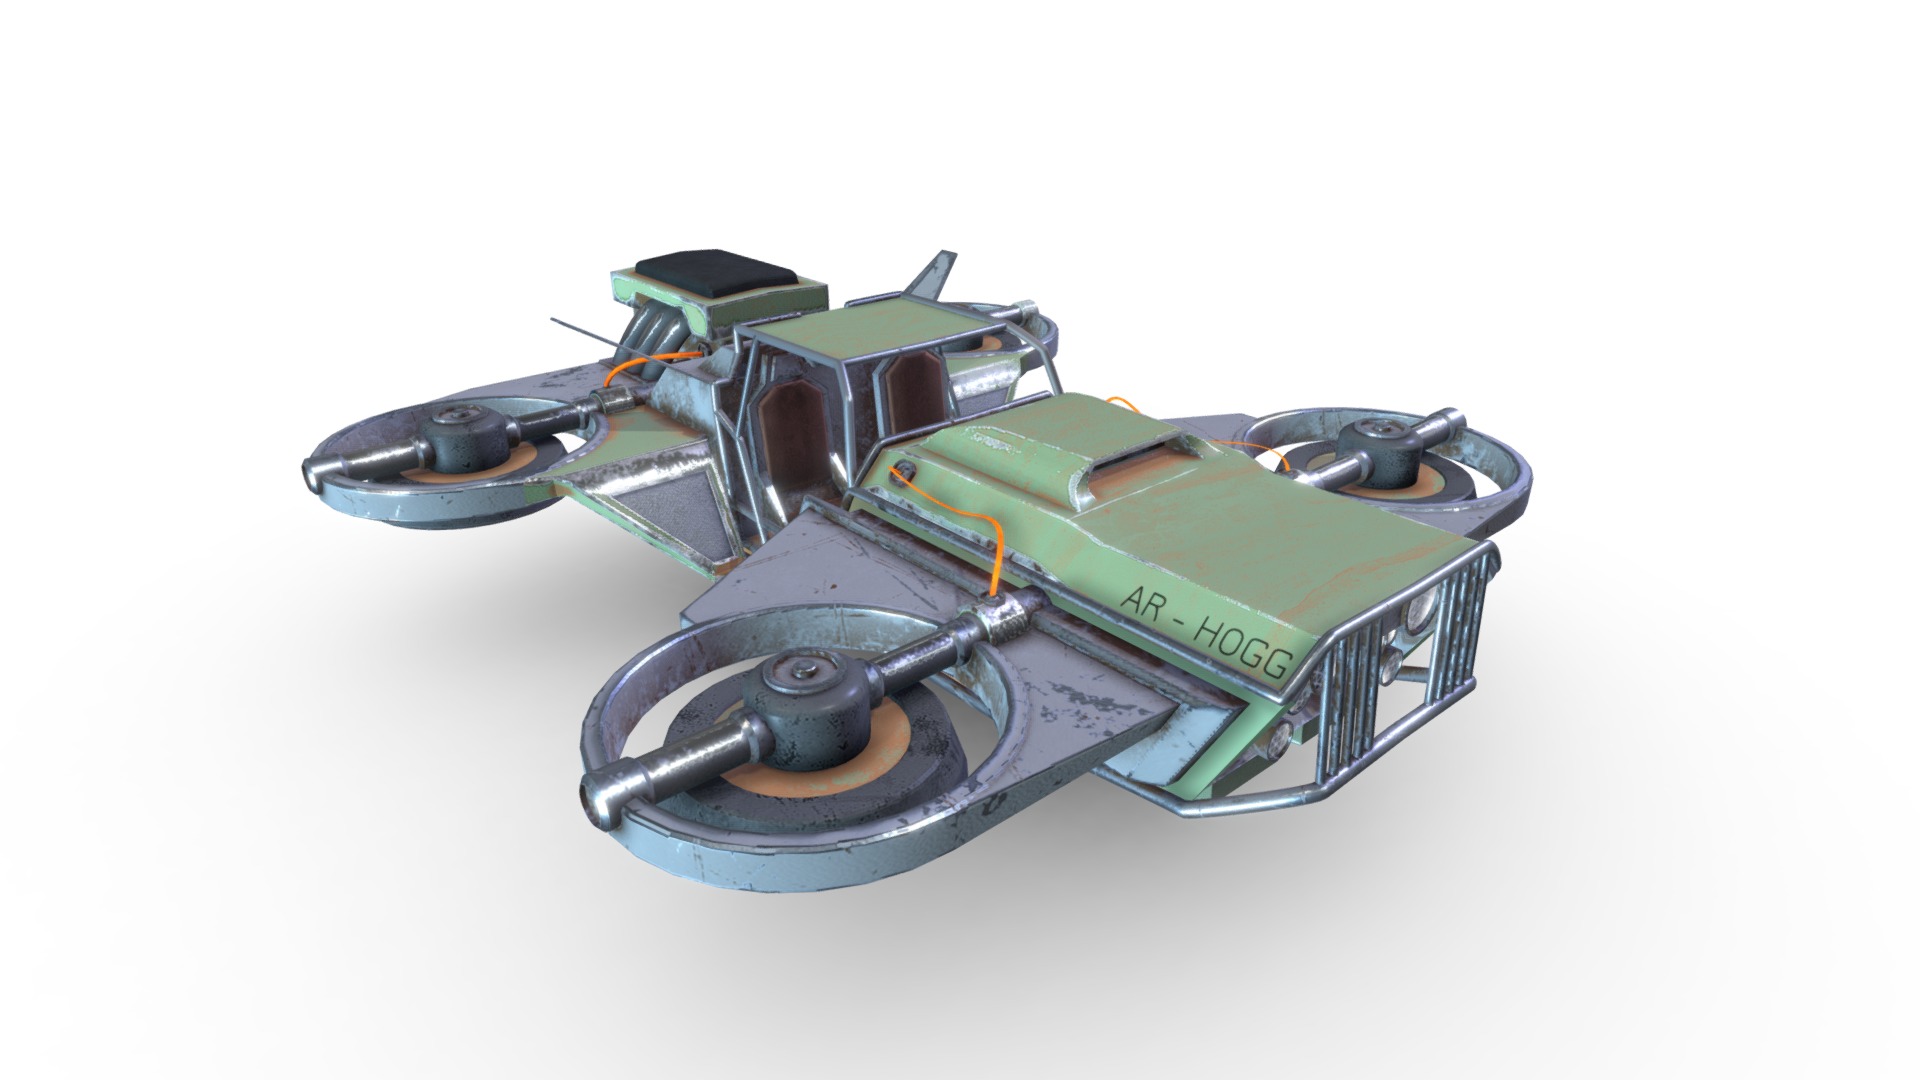 3D model AR-Hogg Vehicle - This is a 3D model of the AR-Hogg Vehicle. The 3D model is about a green and black machine.